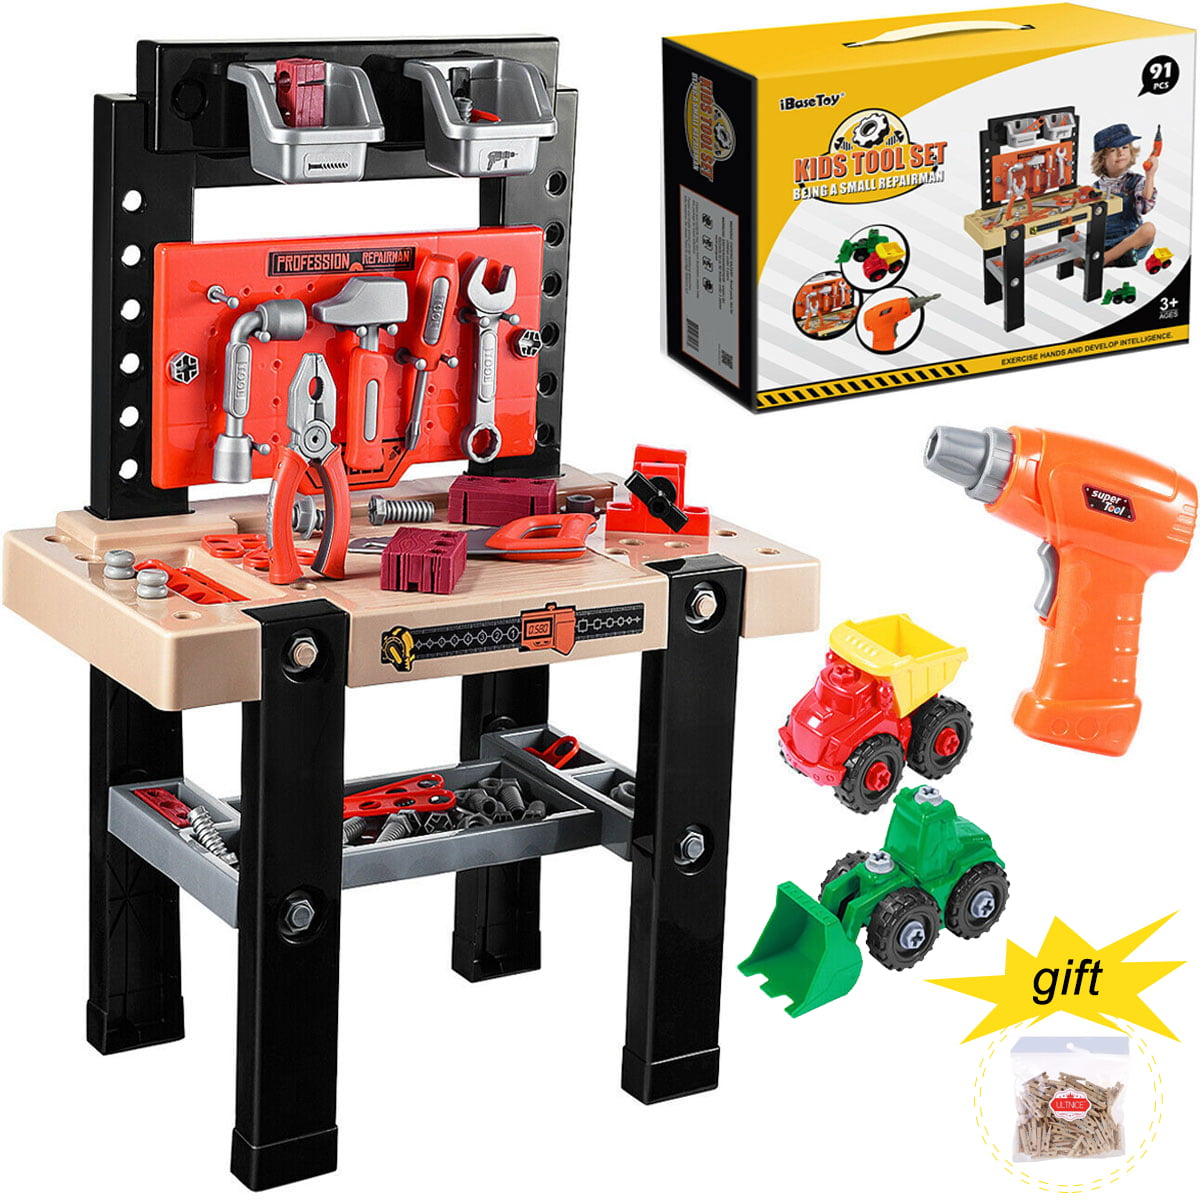 Childrens Work Bench With 69pc Tools Diy Tool Kit Construction Toy Kids Play Set 